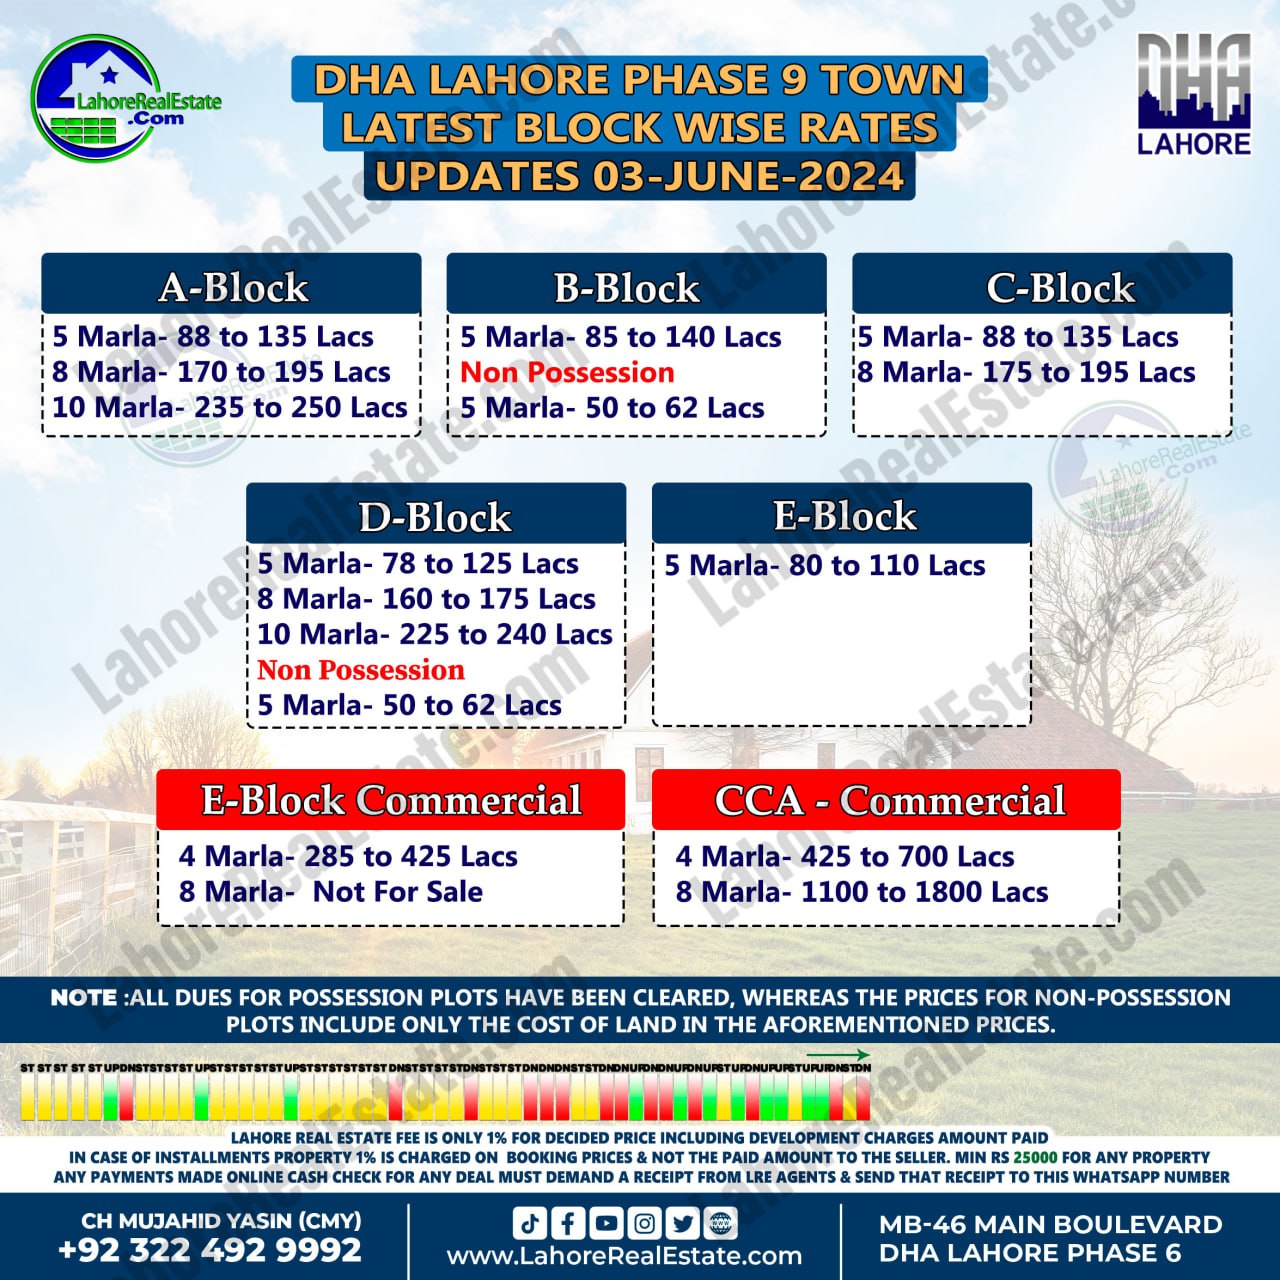 DHA Lahore Phase 9 Town Plot Prices Blockwise Rates June 04, 2024